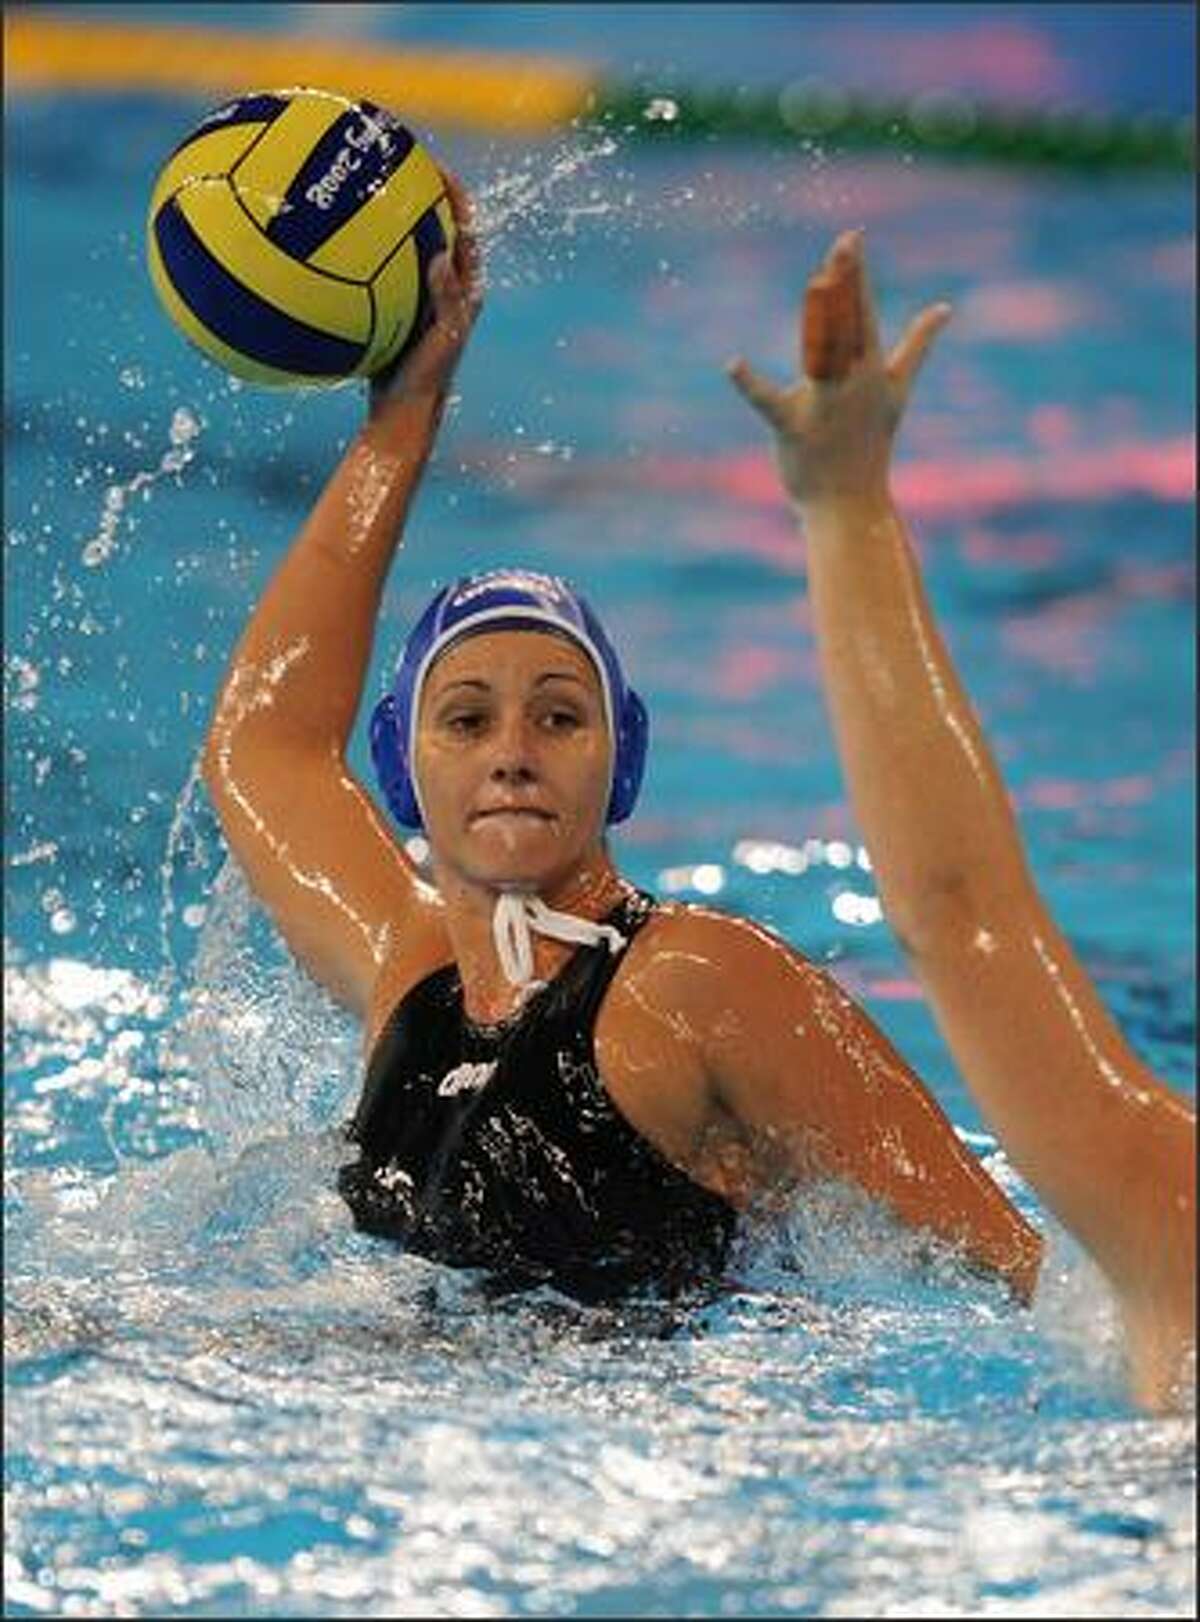 Hungarian player Krisztina Szremko takes a shot for for goal during their women's bronze medal match against Australia at the 2008 Beijing Olympic Games in Beijing on Thursday. Australia went on to win 12-11.